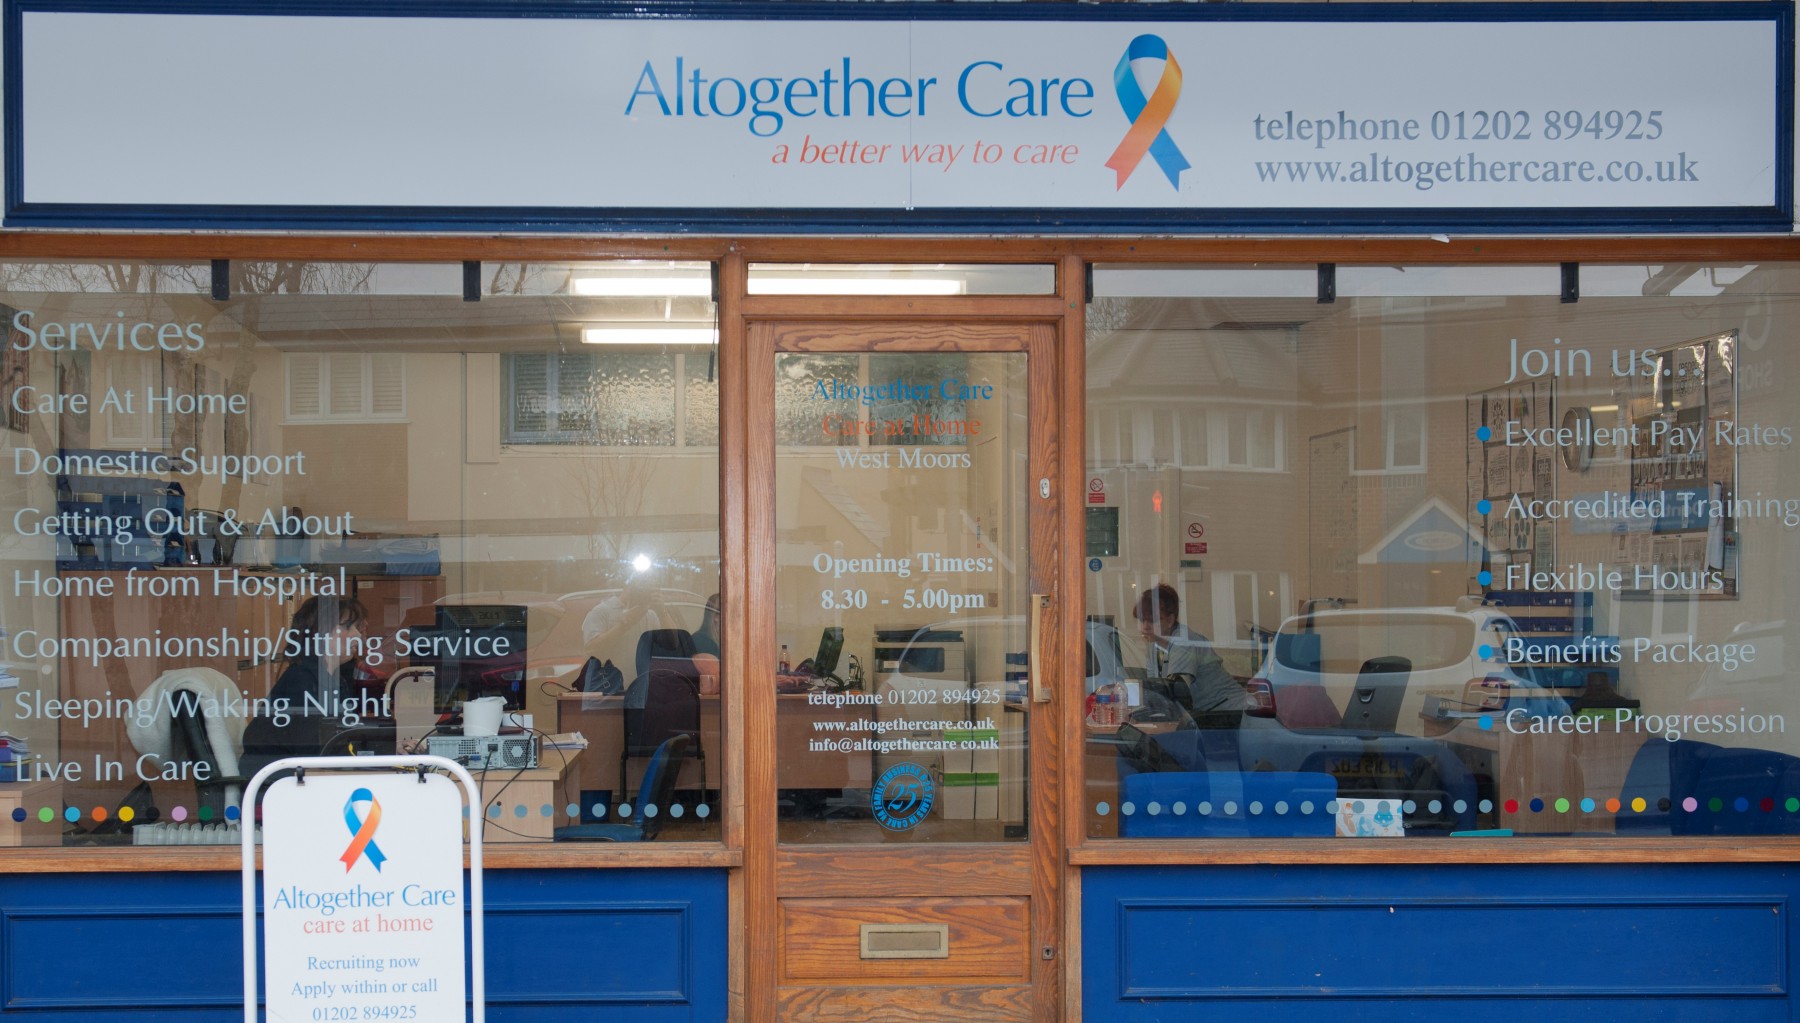 Altogether Care expands its high street presence